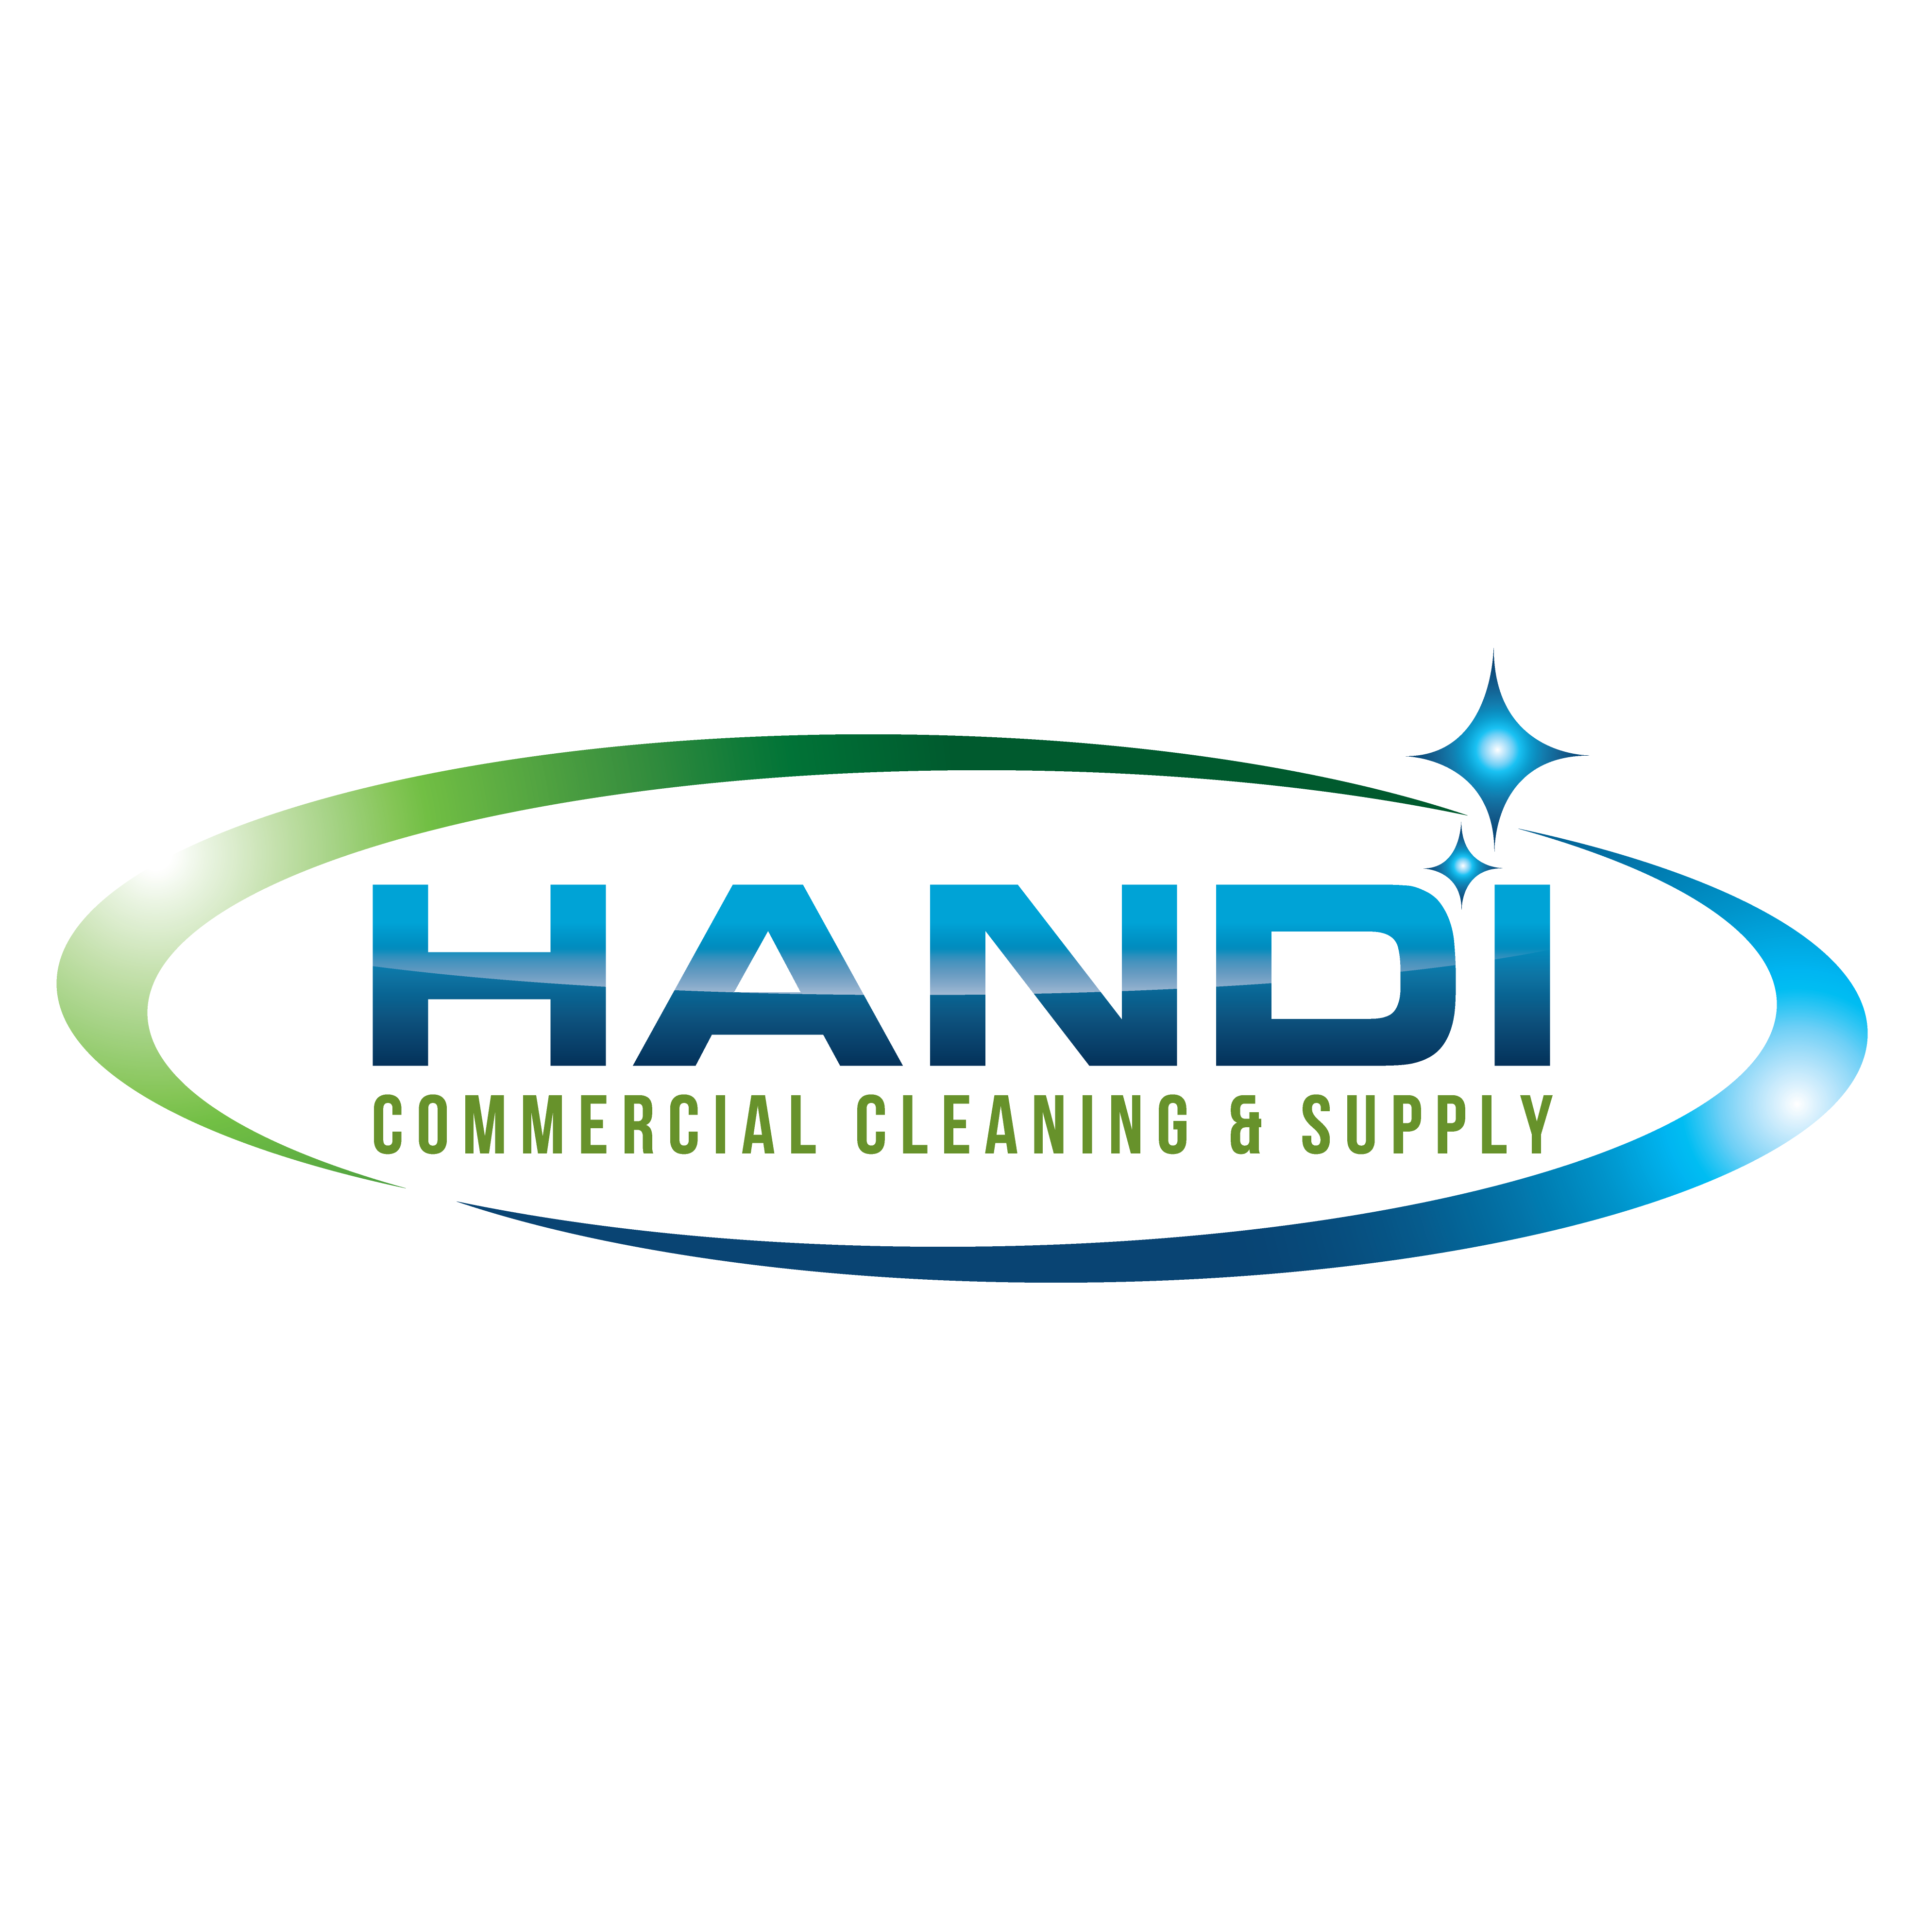 Handi Commercial Cleaning, Minneapolis MN Janitorial Services Logo